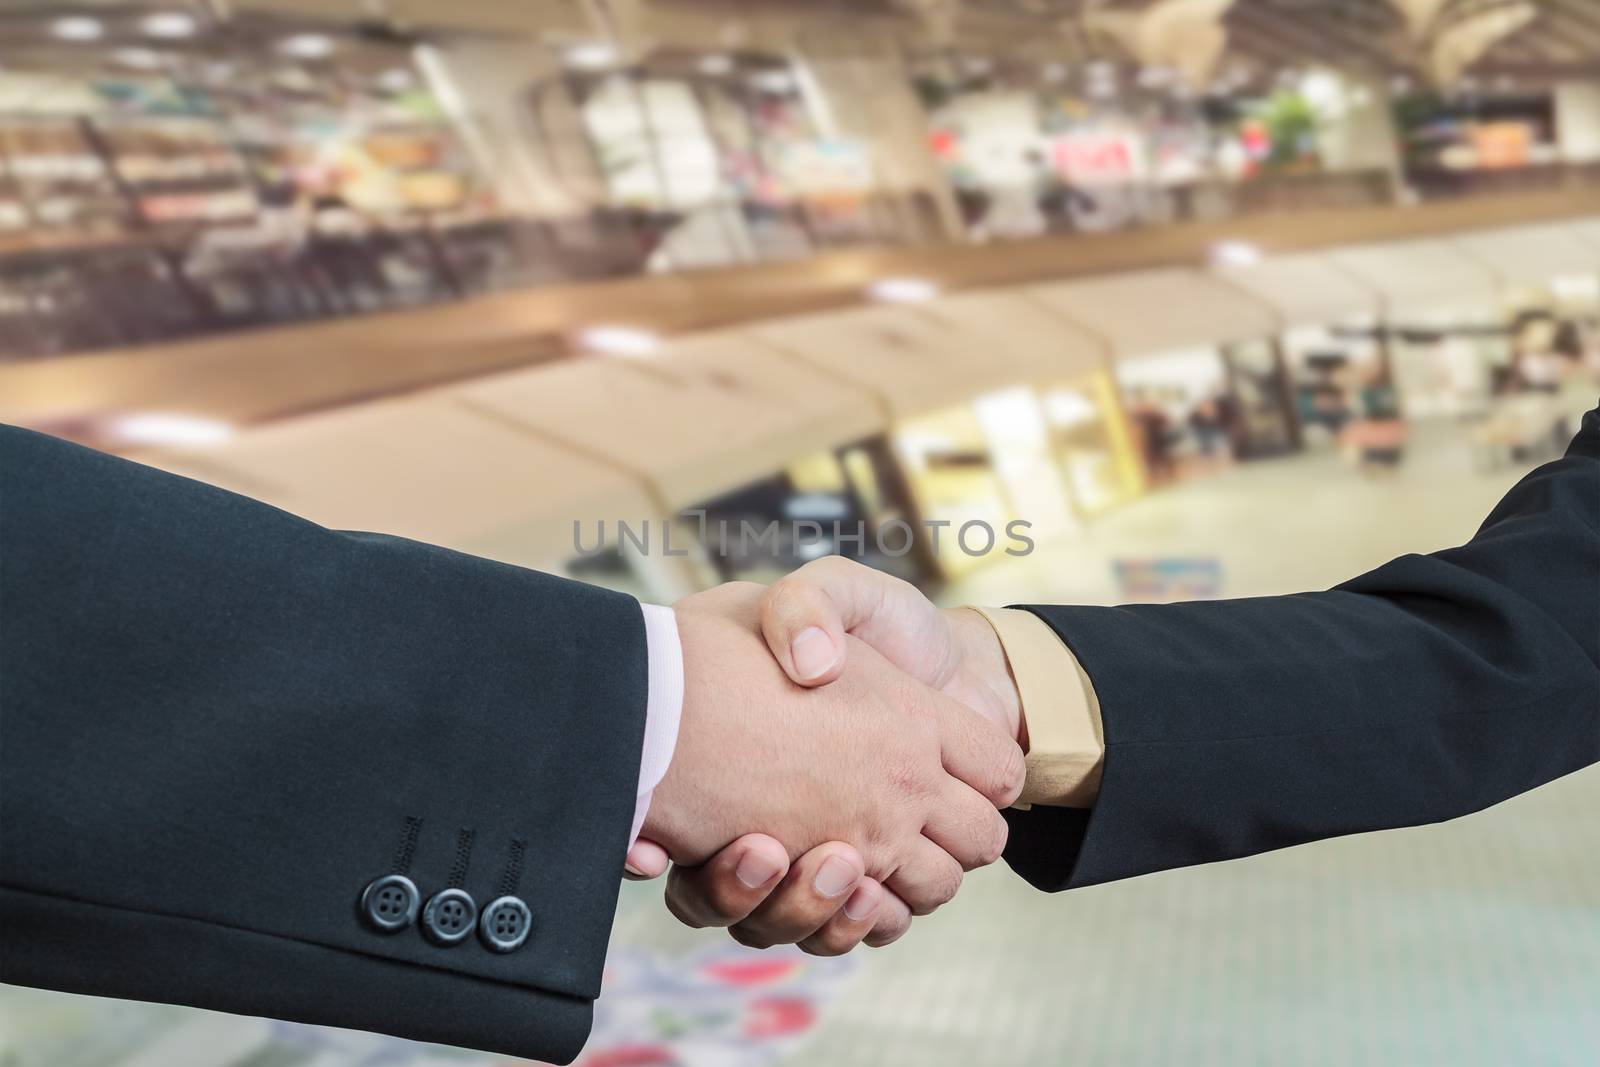 Business handshake with blur background of shopping mall market